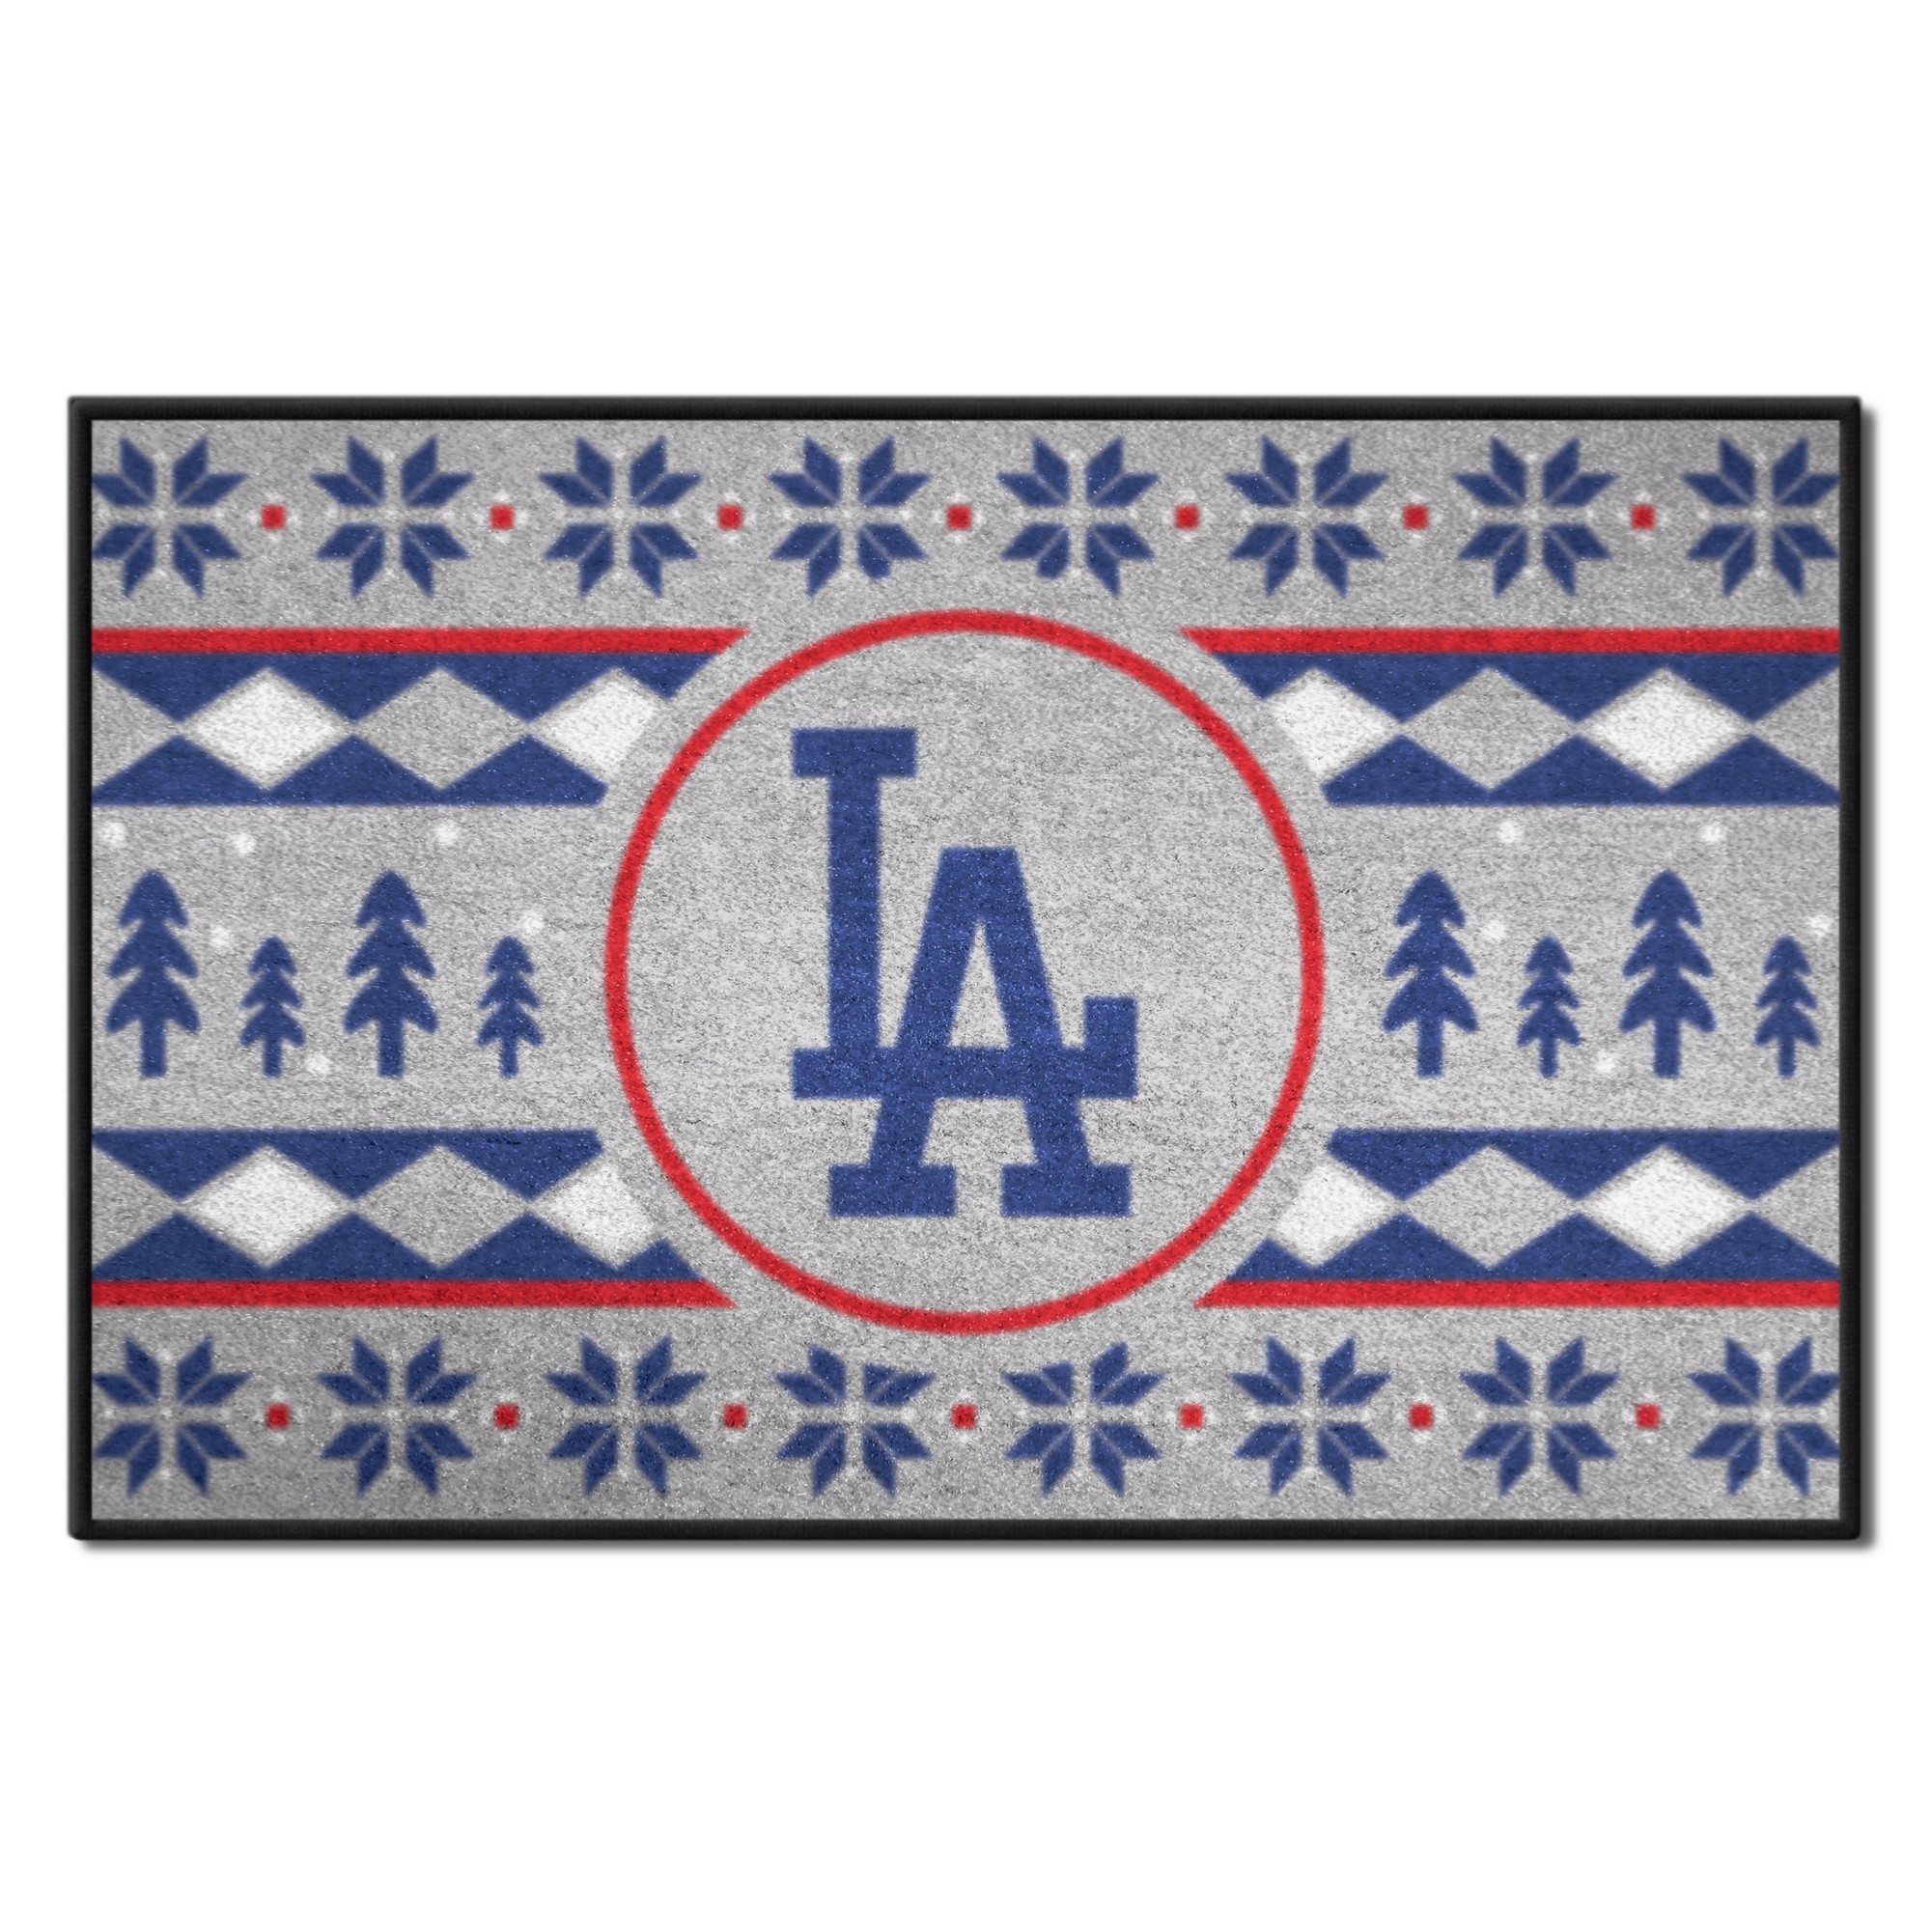 Officially Licensed NHL Holiday Sweater Rug 19x30 - New York Rangers